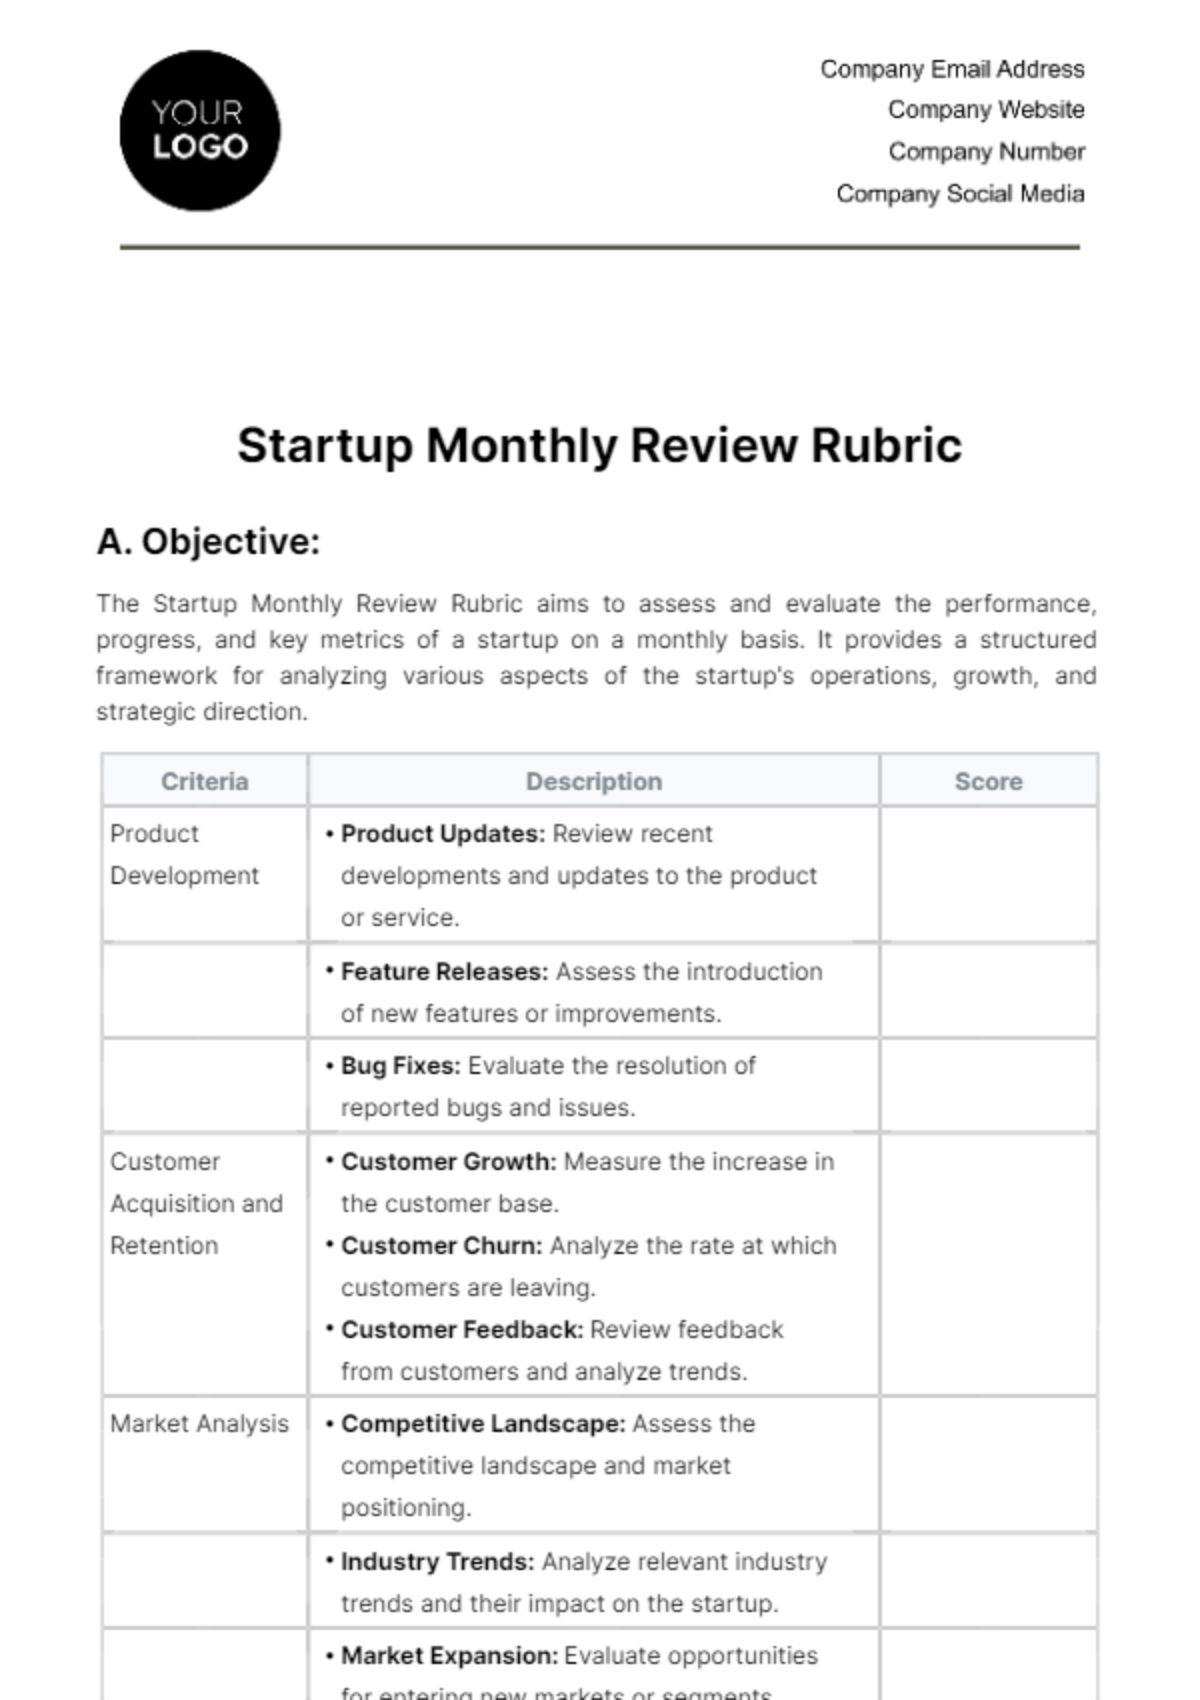 Startup Monthly Review Rubric Template